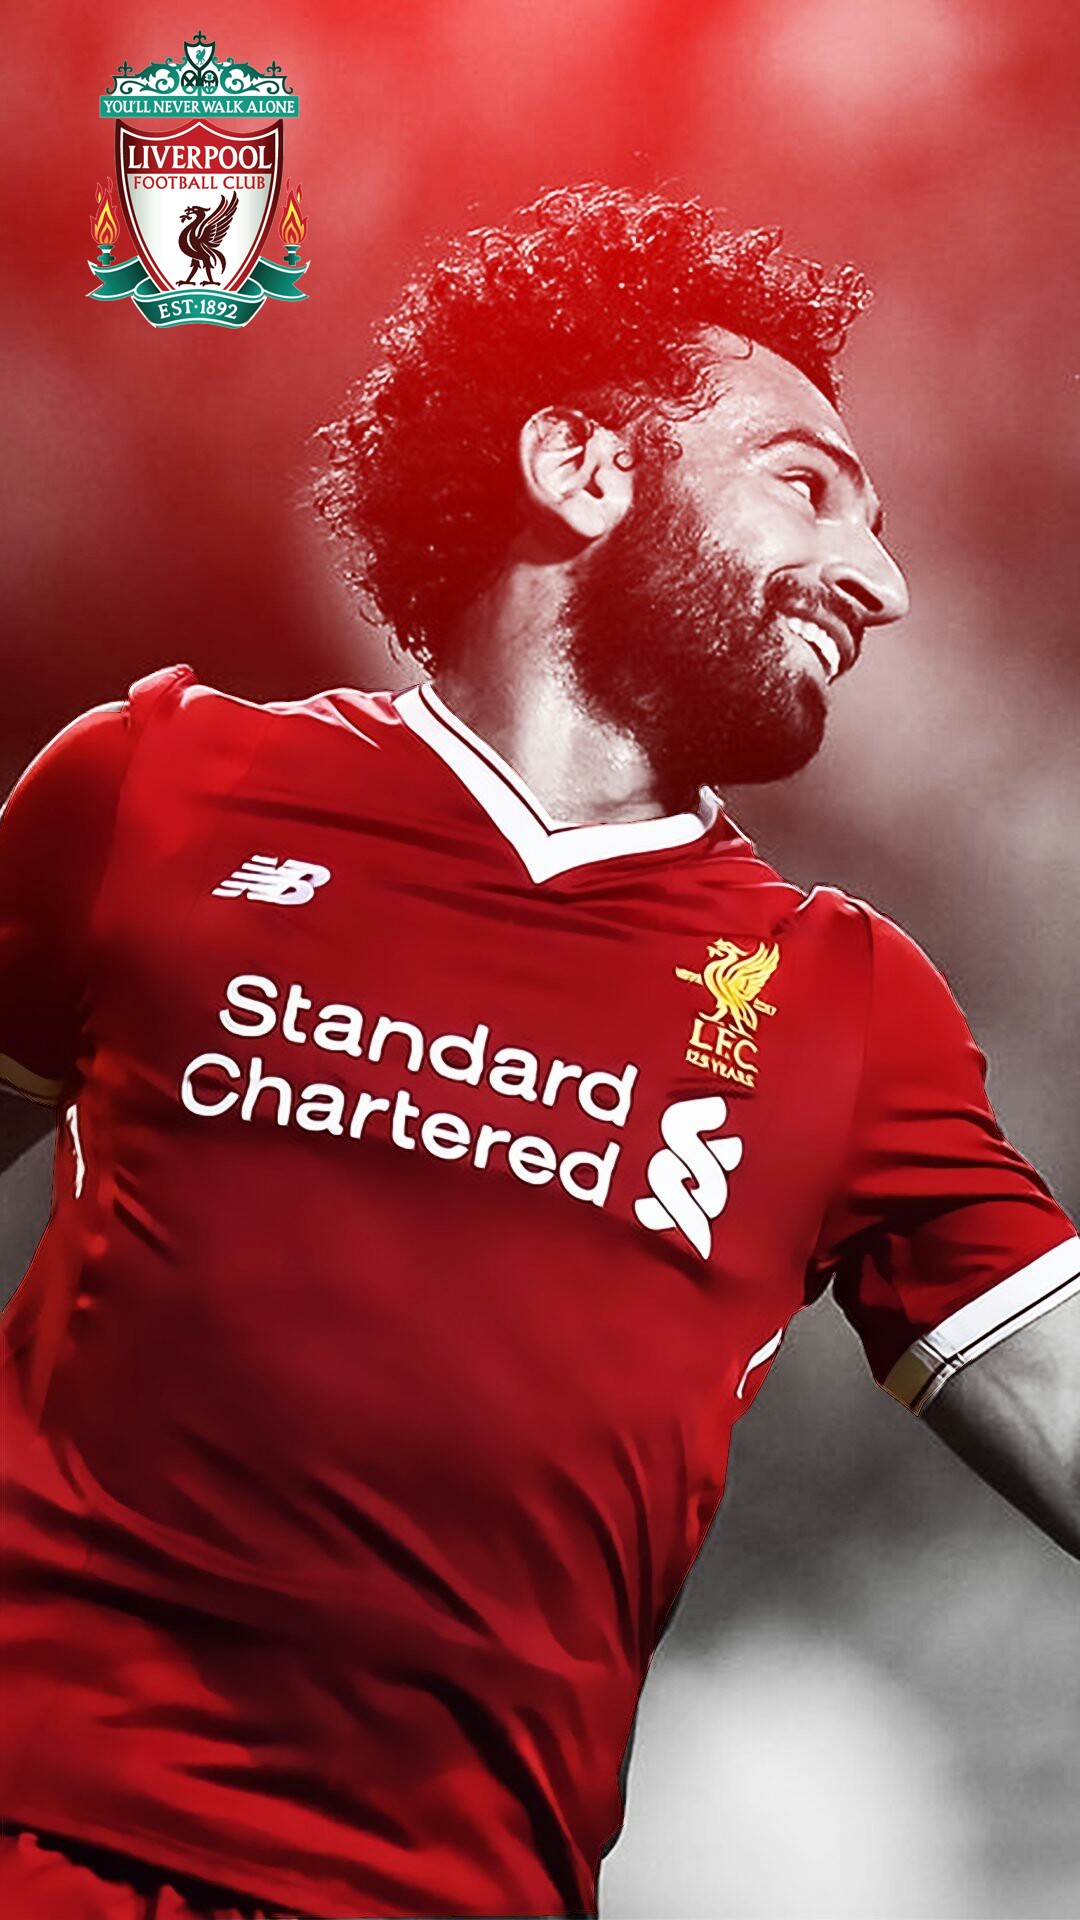 iPhone Wallpaper Mo Salah with image resolution 1080x1920 pixel. You can make this wallpaper for your iPhone 5, 6, 7, 8, X backgrounds, Mobile Screensaver, or iPad Lock Screen